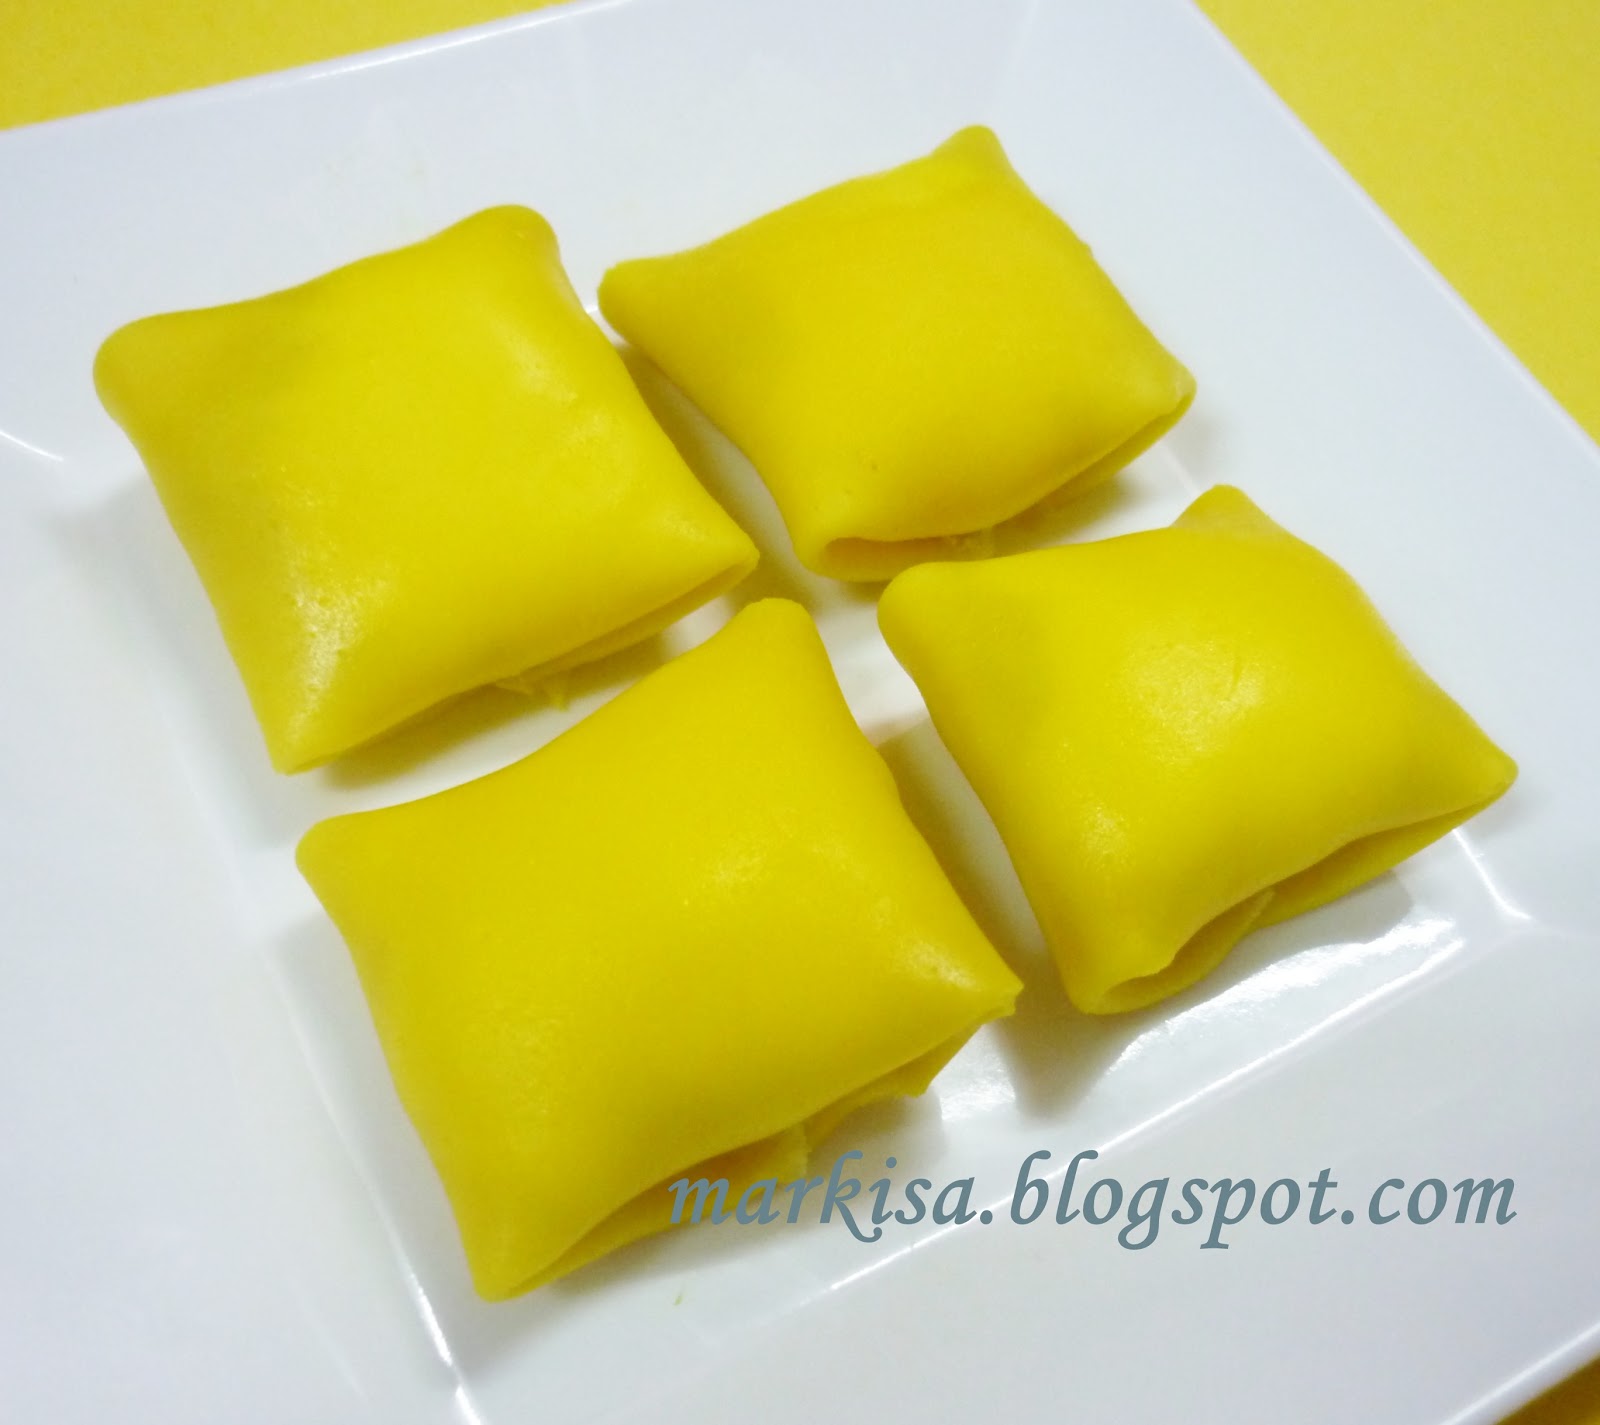 BAKED BY CIK TA: DURIAN CREPE